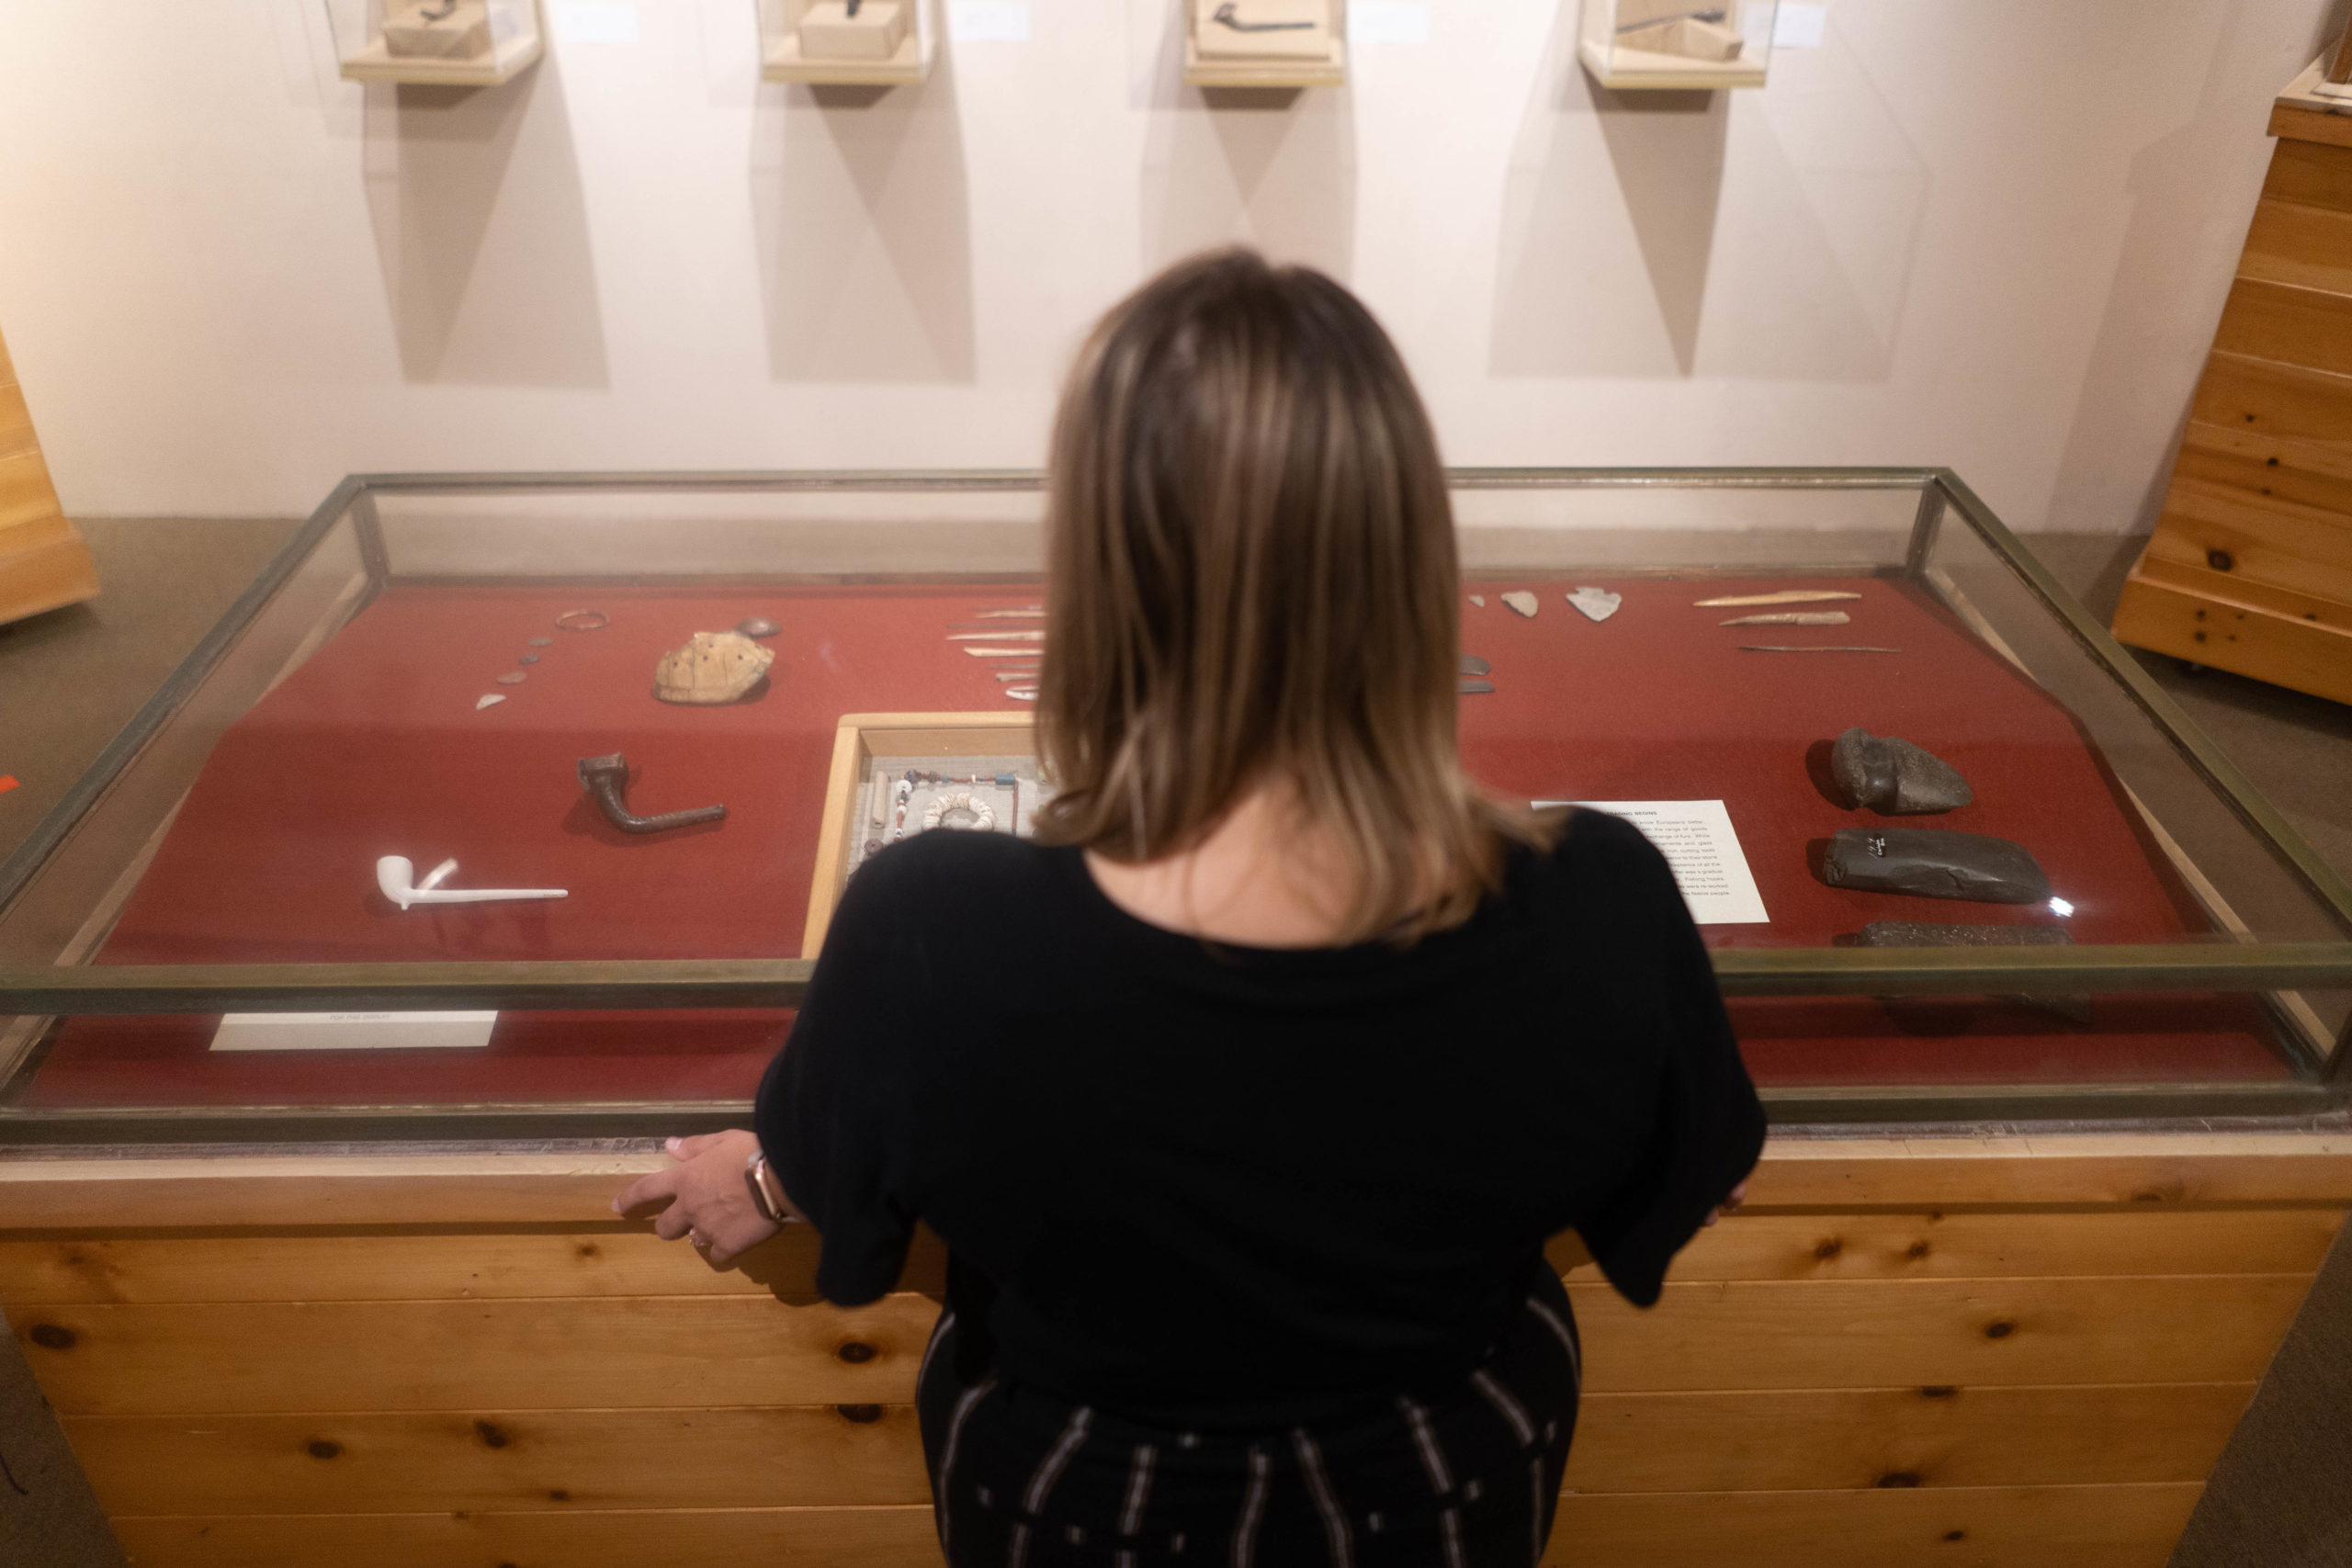 Woman observing indigenous artifacts through enclosed class case